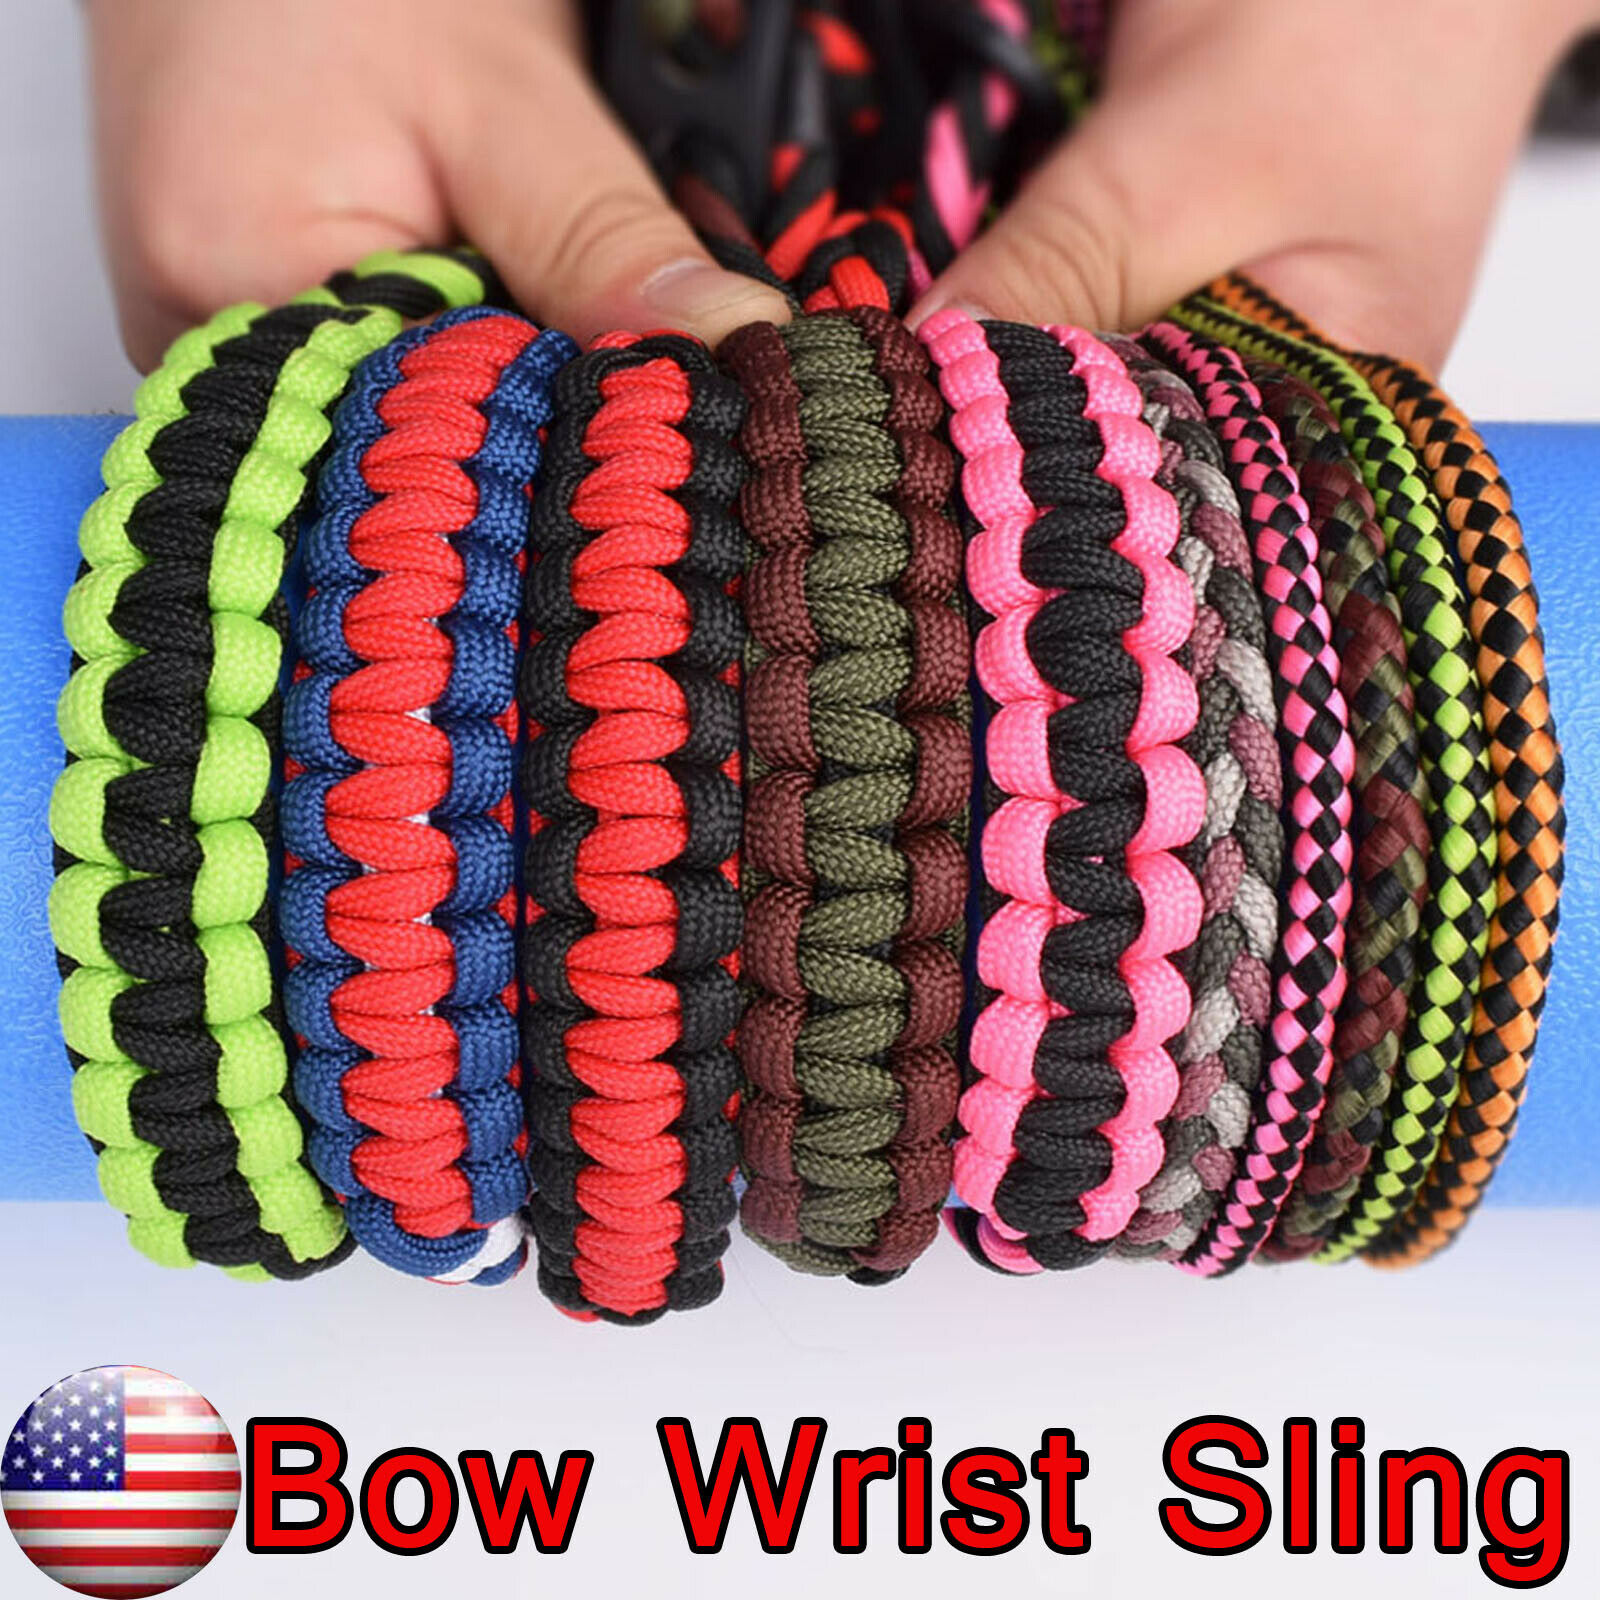 Archery Bow Wrist Sling Strap Braided Compound Bow Adjustable Paracord Colorful